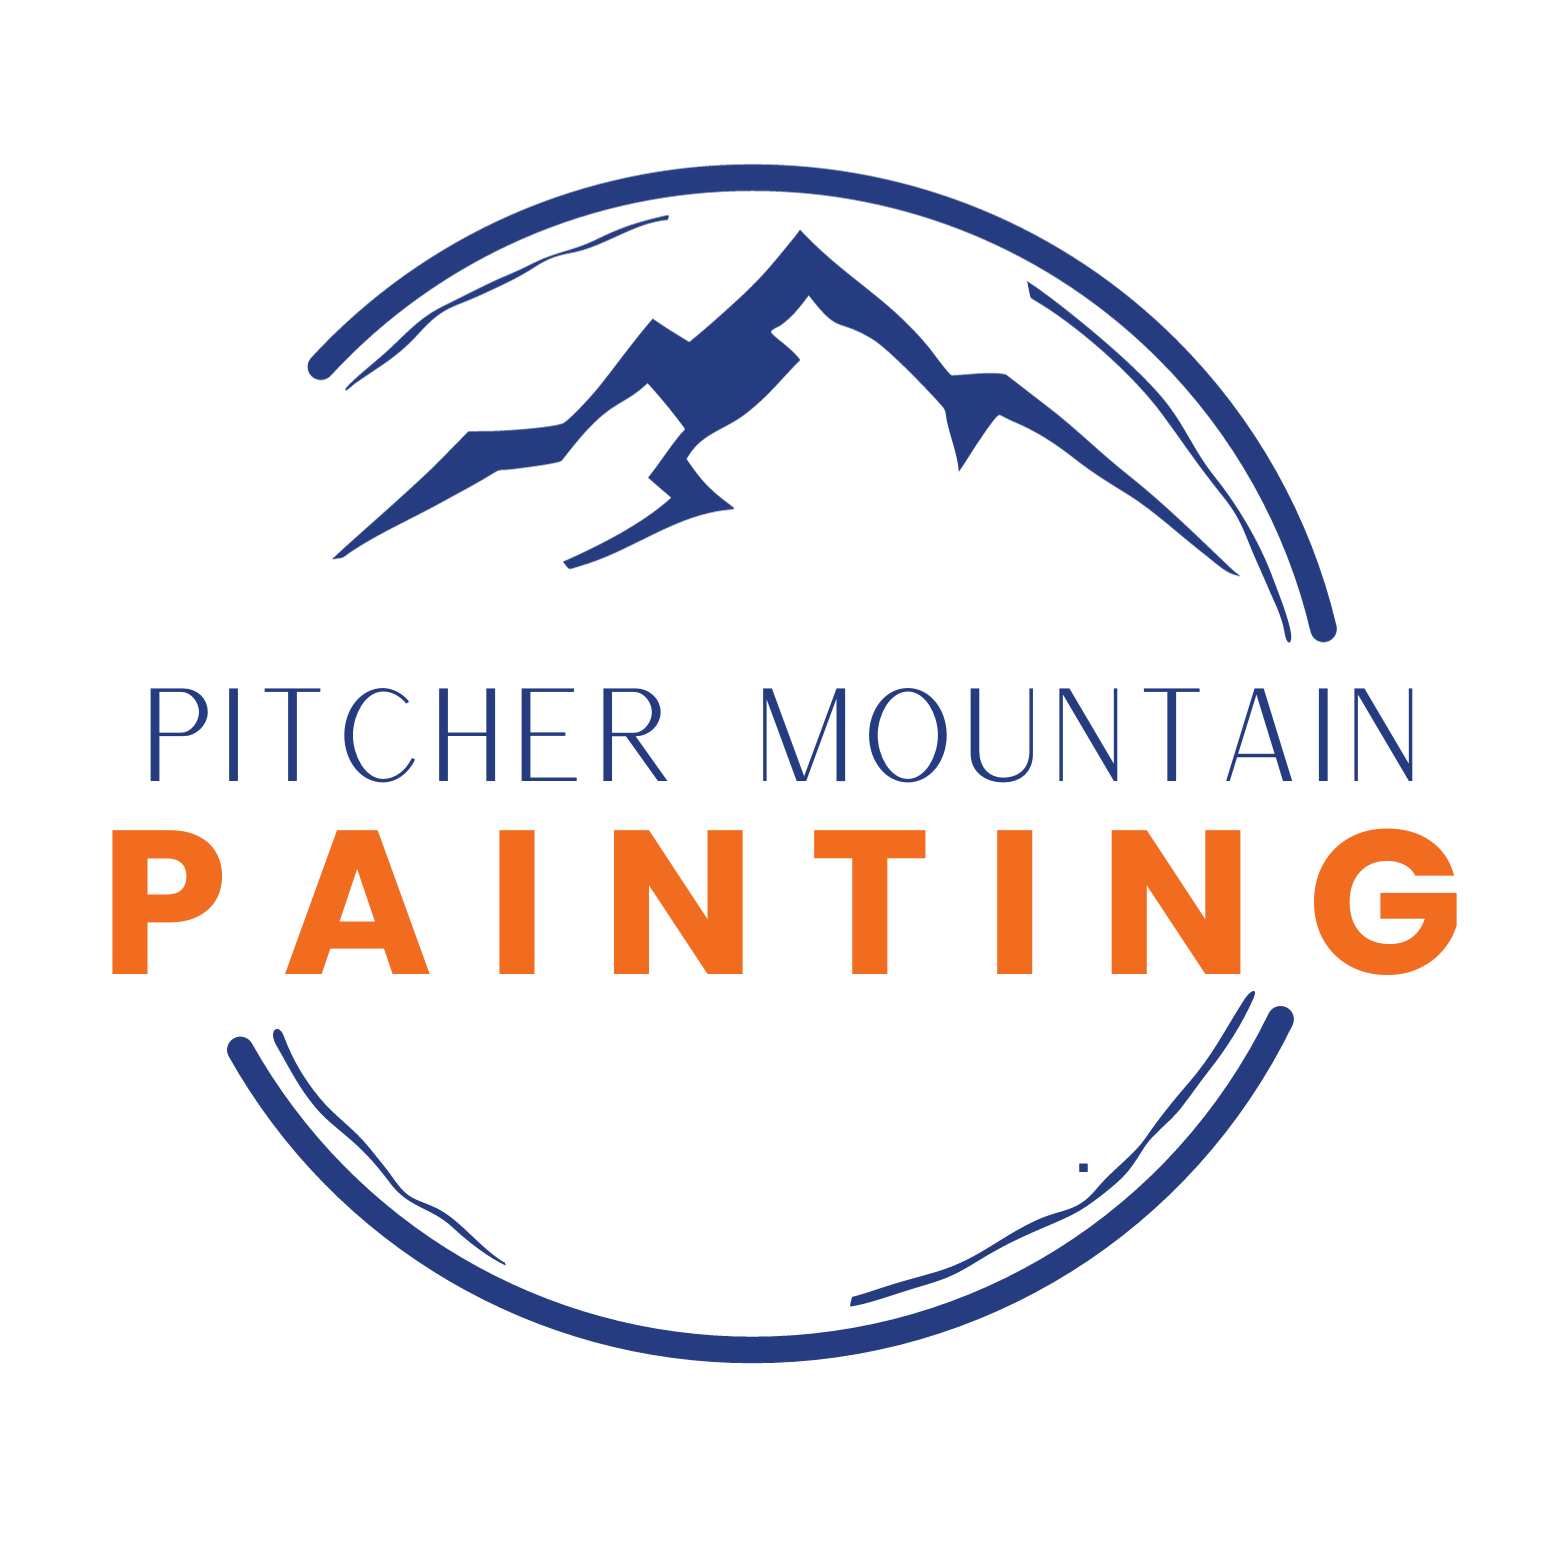 Pitcher Mountain Painting